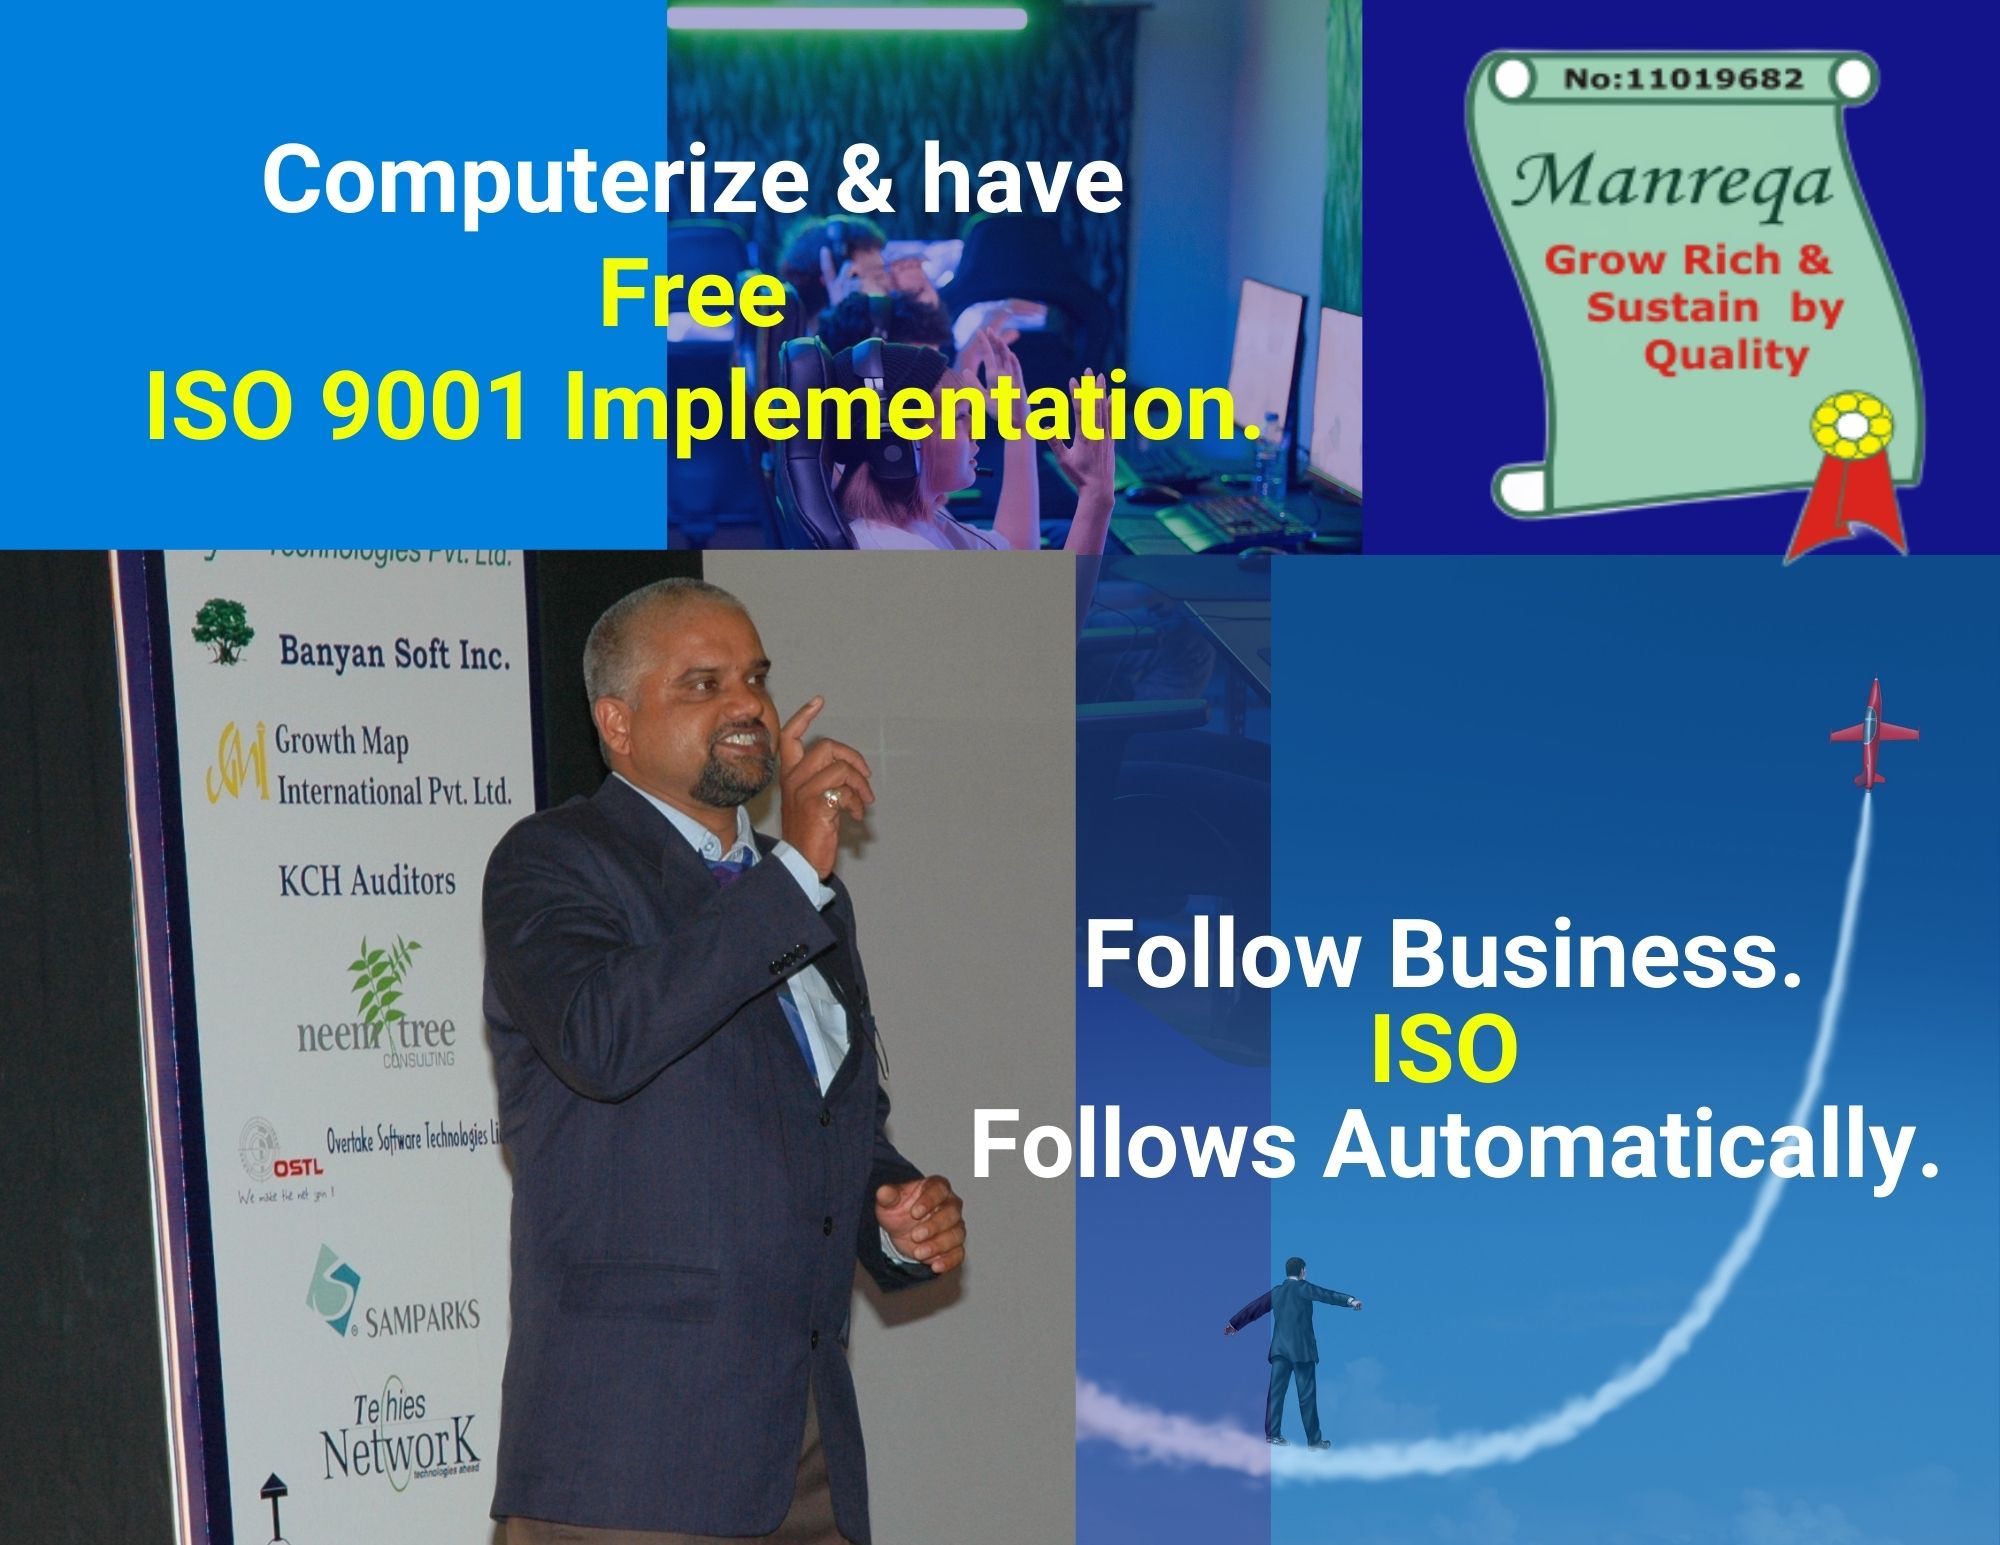 Computerize & have Free ISO 9001 Implementation.
Follow Business. ISO Follows Automatically. 